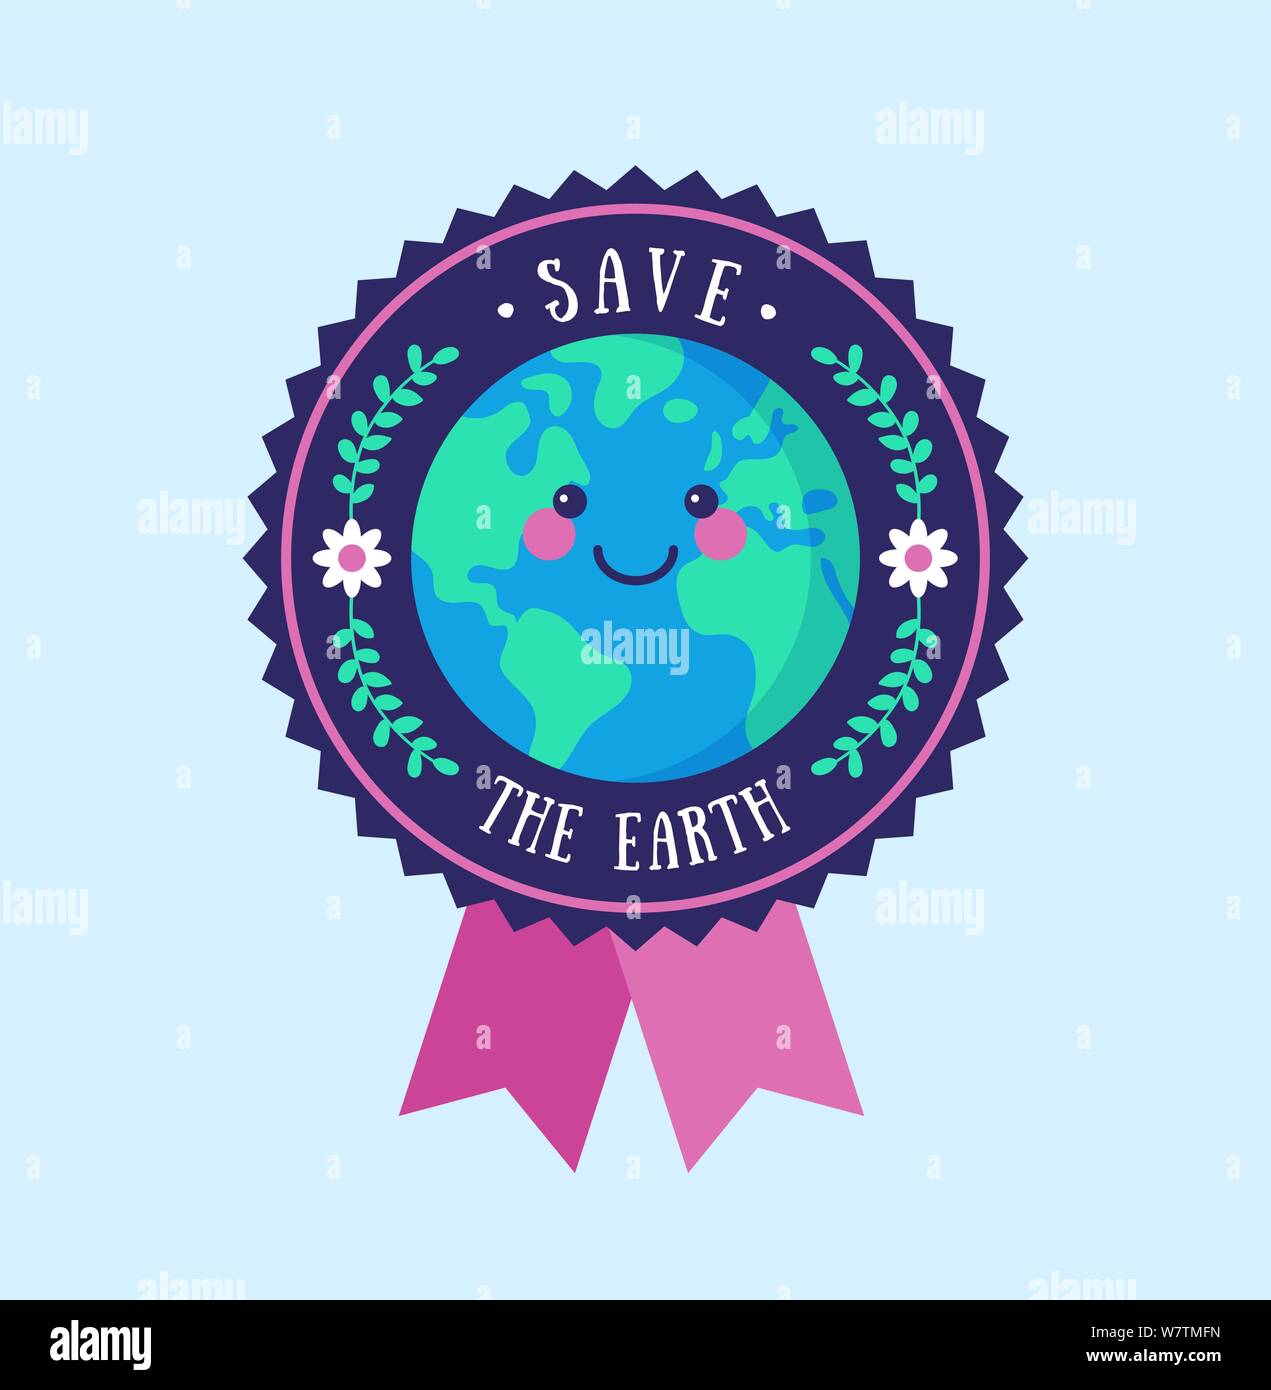 Save the Earth badge. Environmental conservation concept. Vector illustration. Stock Vector